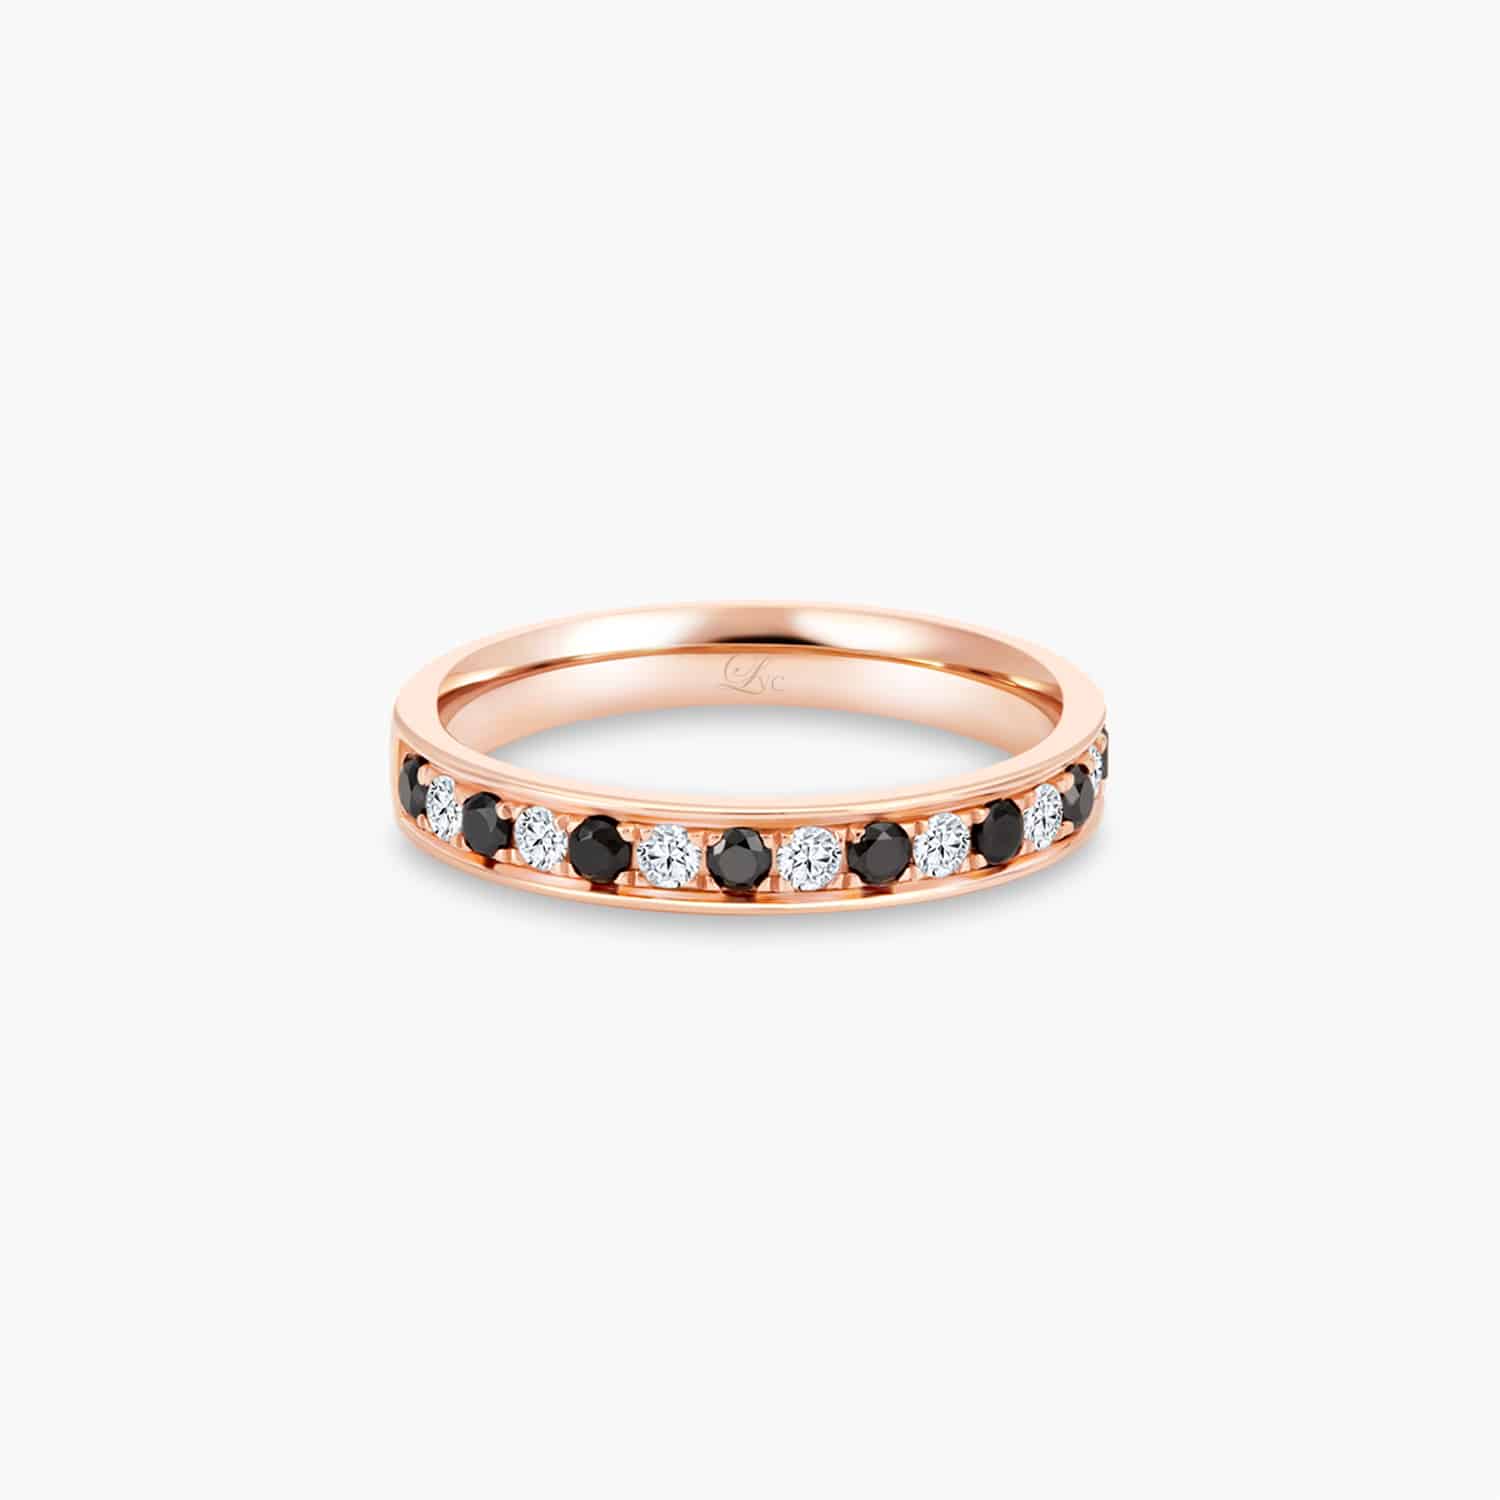 LVC Eterno Women's Wedding Band & Wedding ring set in White and Rose Gold with Center Black Diamond